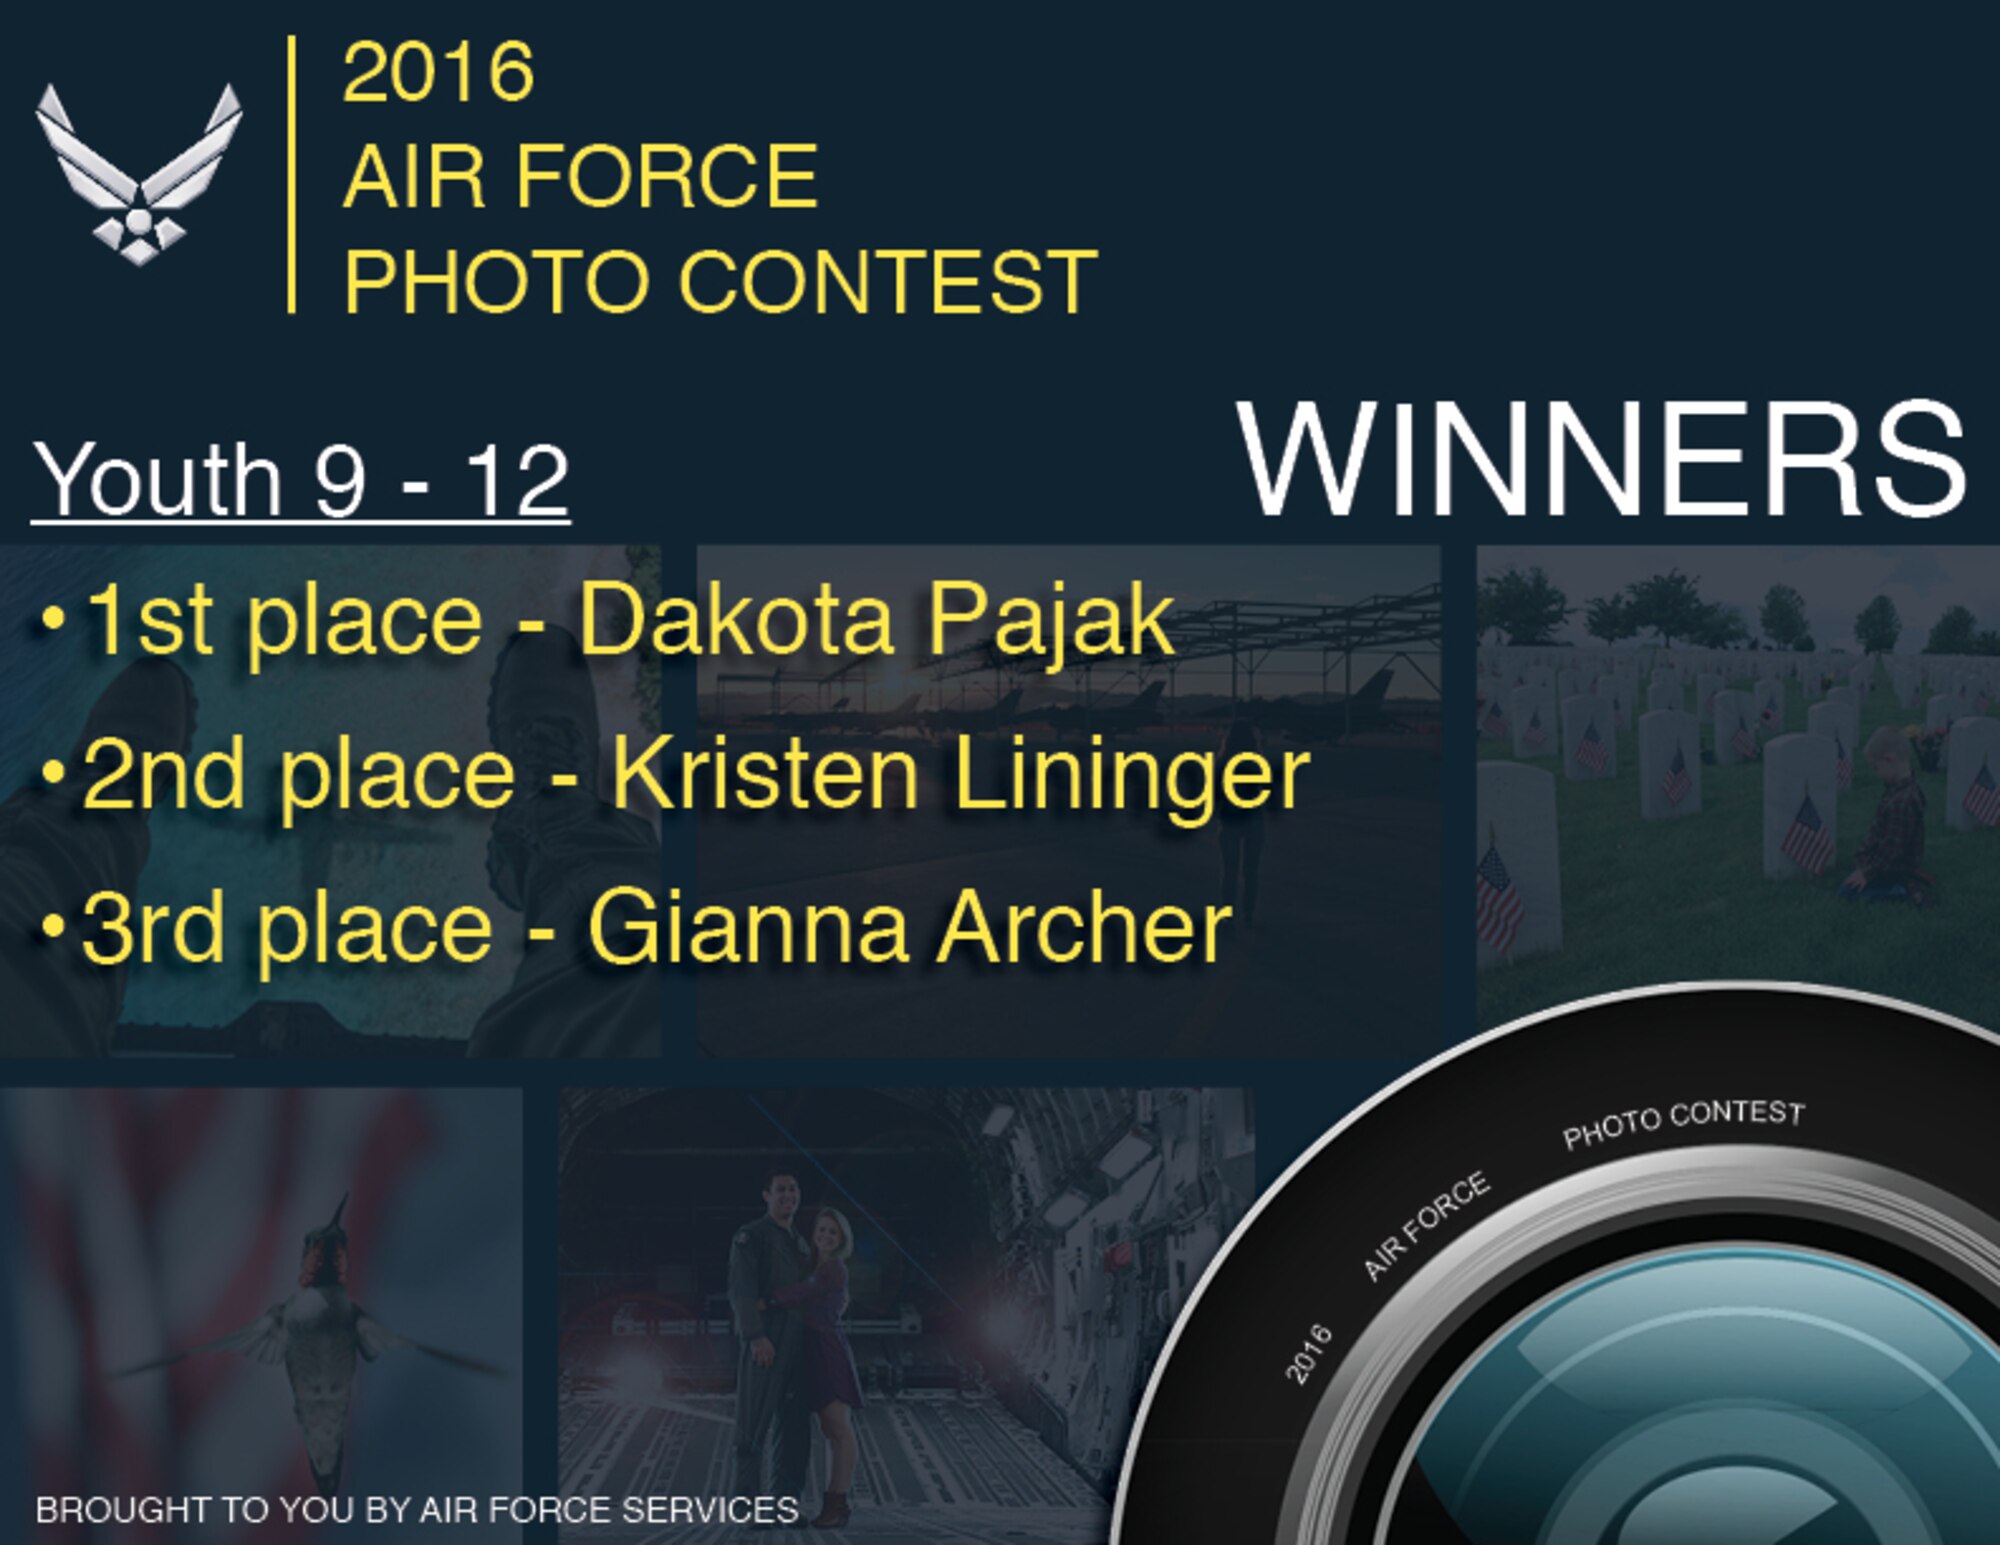 2016 Air Force Photo Contest winners youth ages 9-12